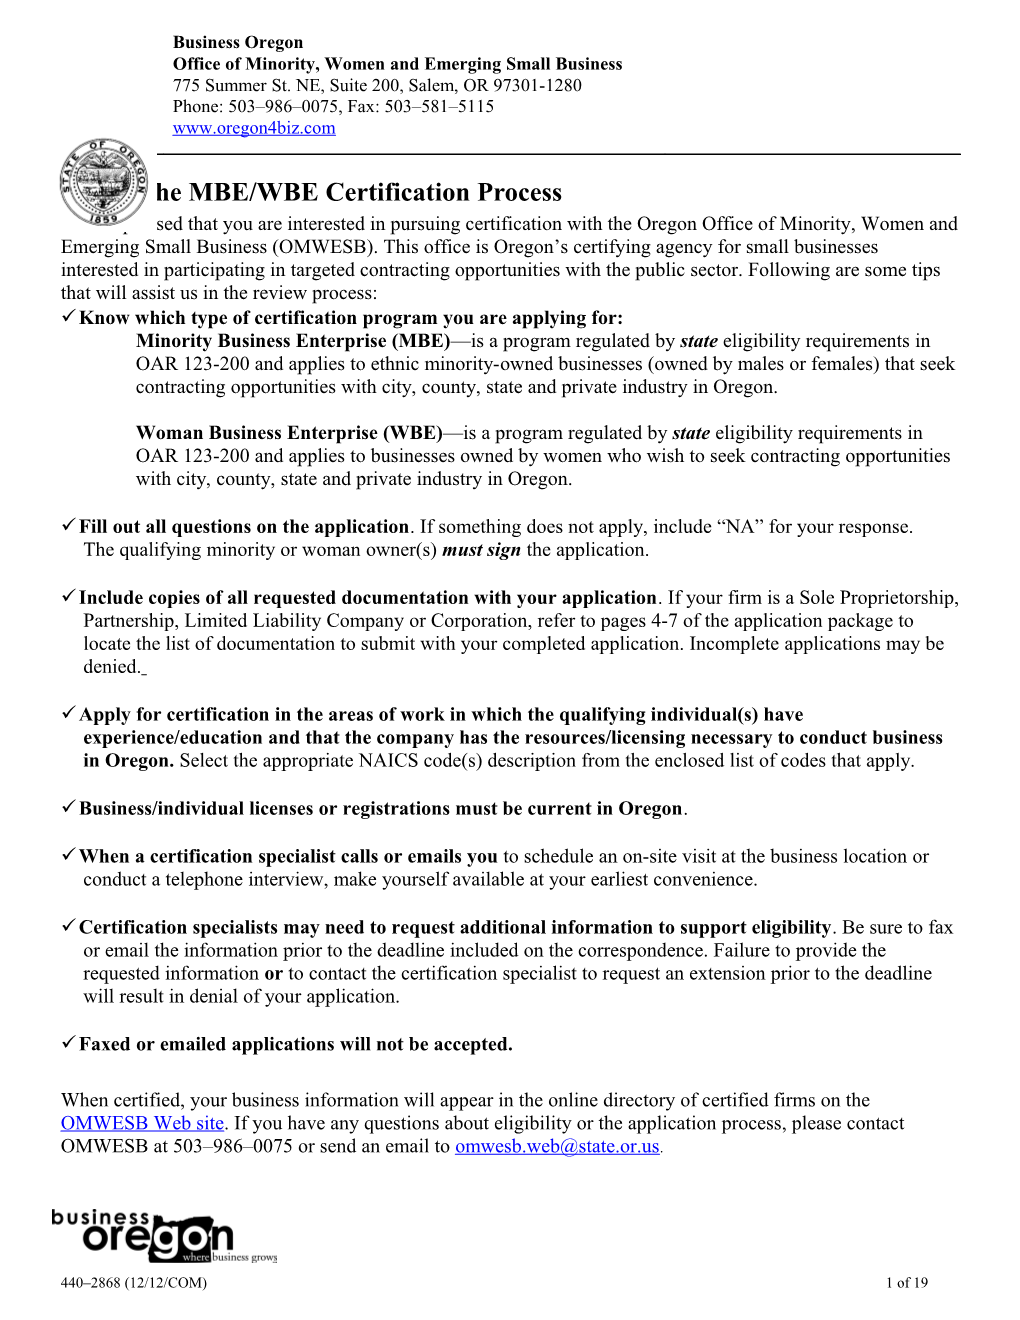 MBE/WBE Certification Application Packet